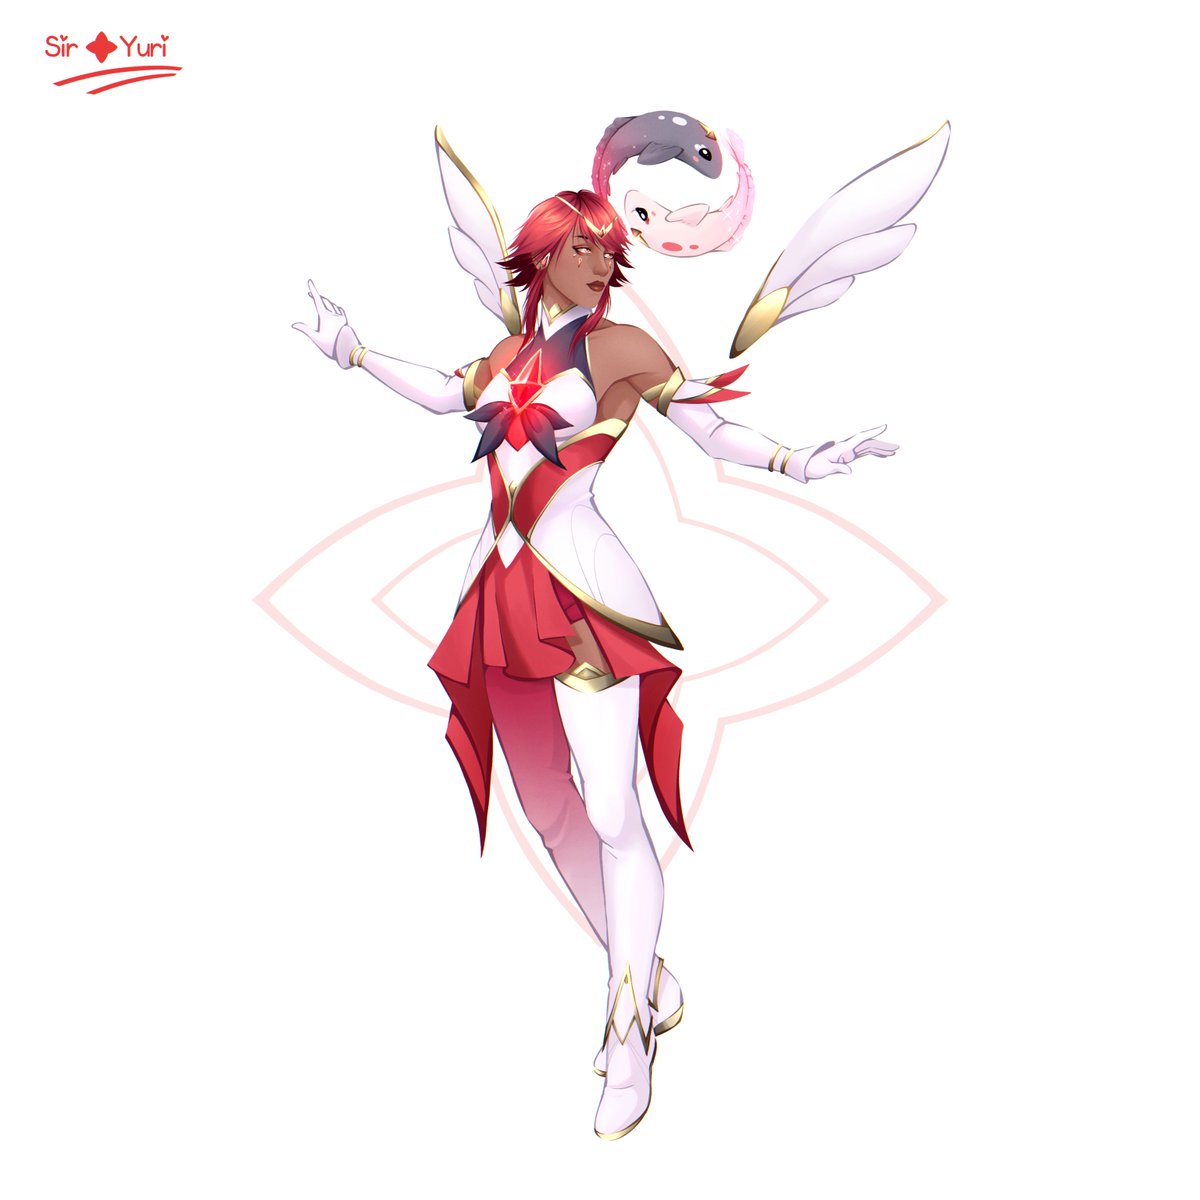 ✨ STAR GUARDIAN KARMA ✨

When Darha was younger, she was a reckless and temperamental girl against order and duty. After forcibly maturing thanks to the horrors that the cosmos offers, Darha mentors Nami as the second team leader.

#StarGuardian #LeagueofLegends